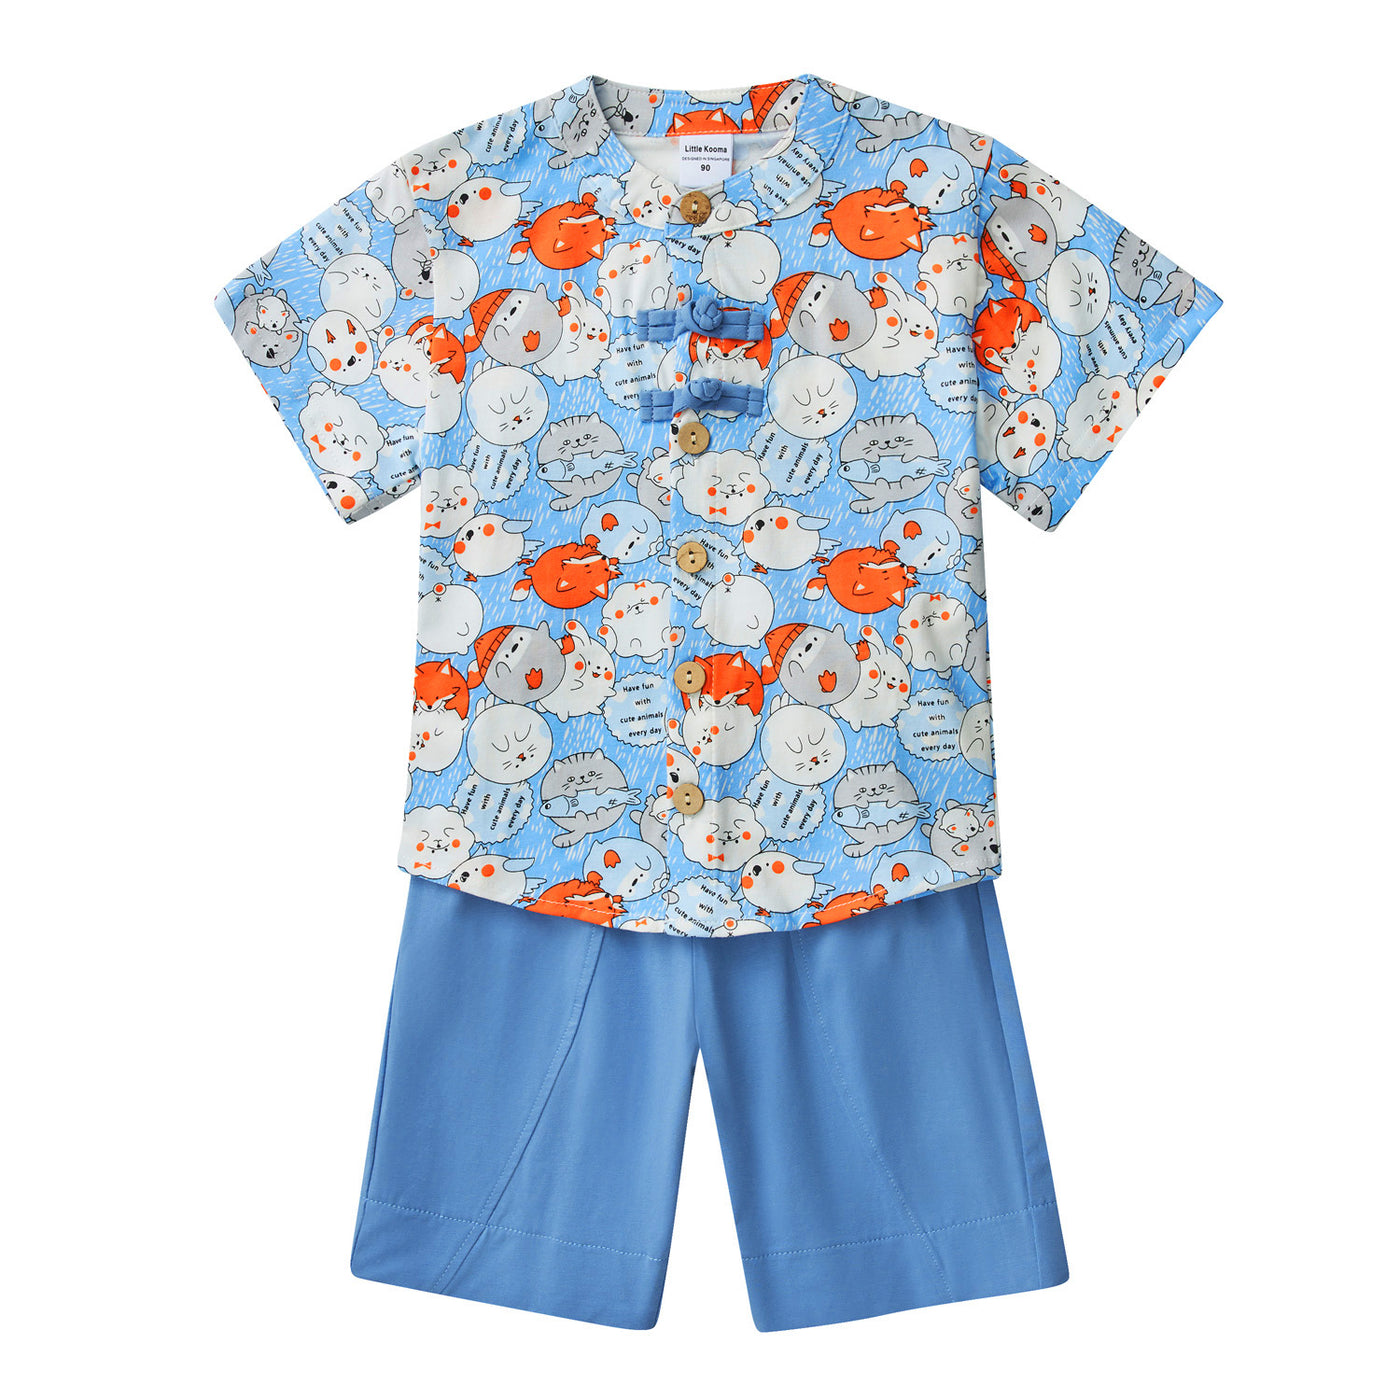 Purrfect Family Paws Baby Kids Boys Blue Cats Cheongsam Set Top n Shorts CNY Chinese New Year Outfit Family Wear 0818 - Little Kooma